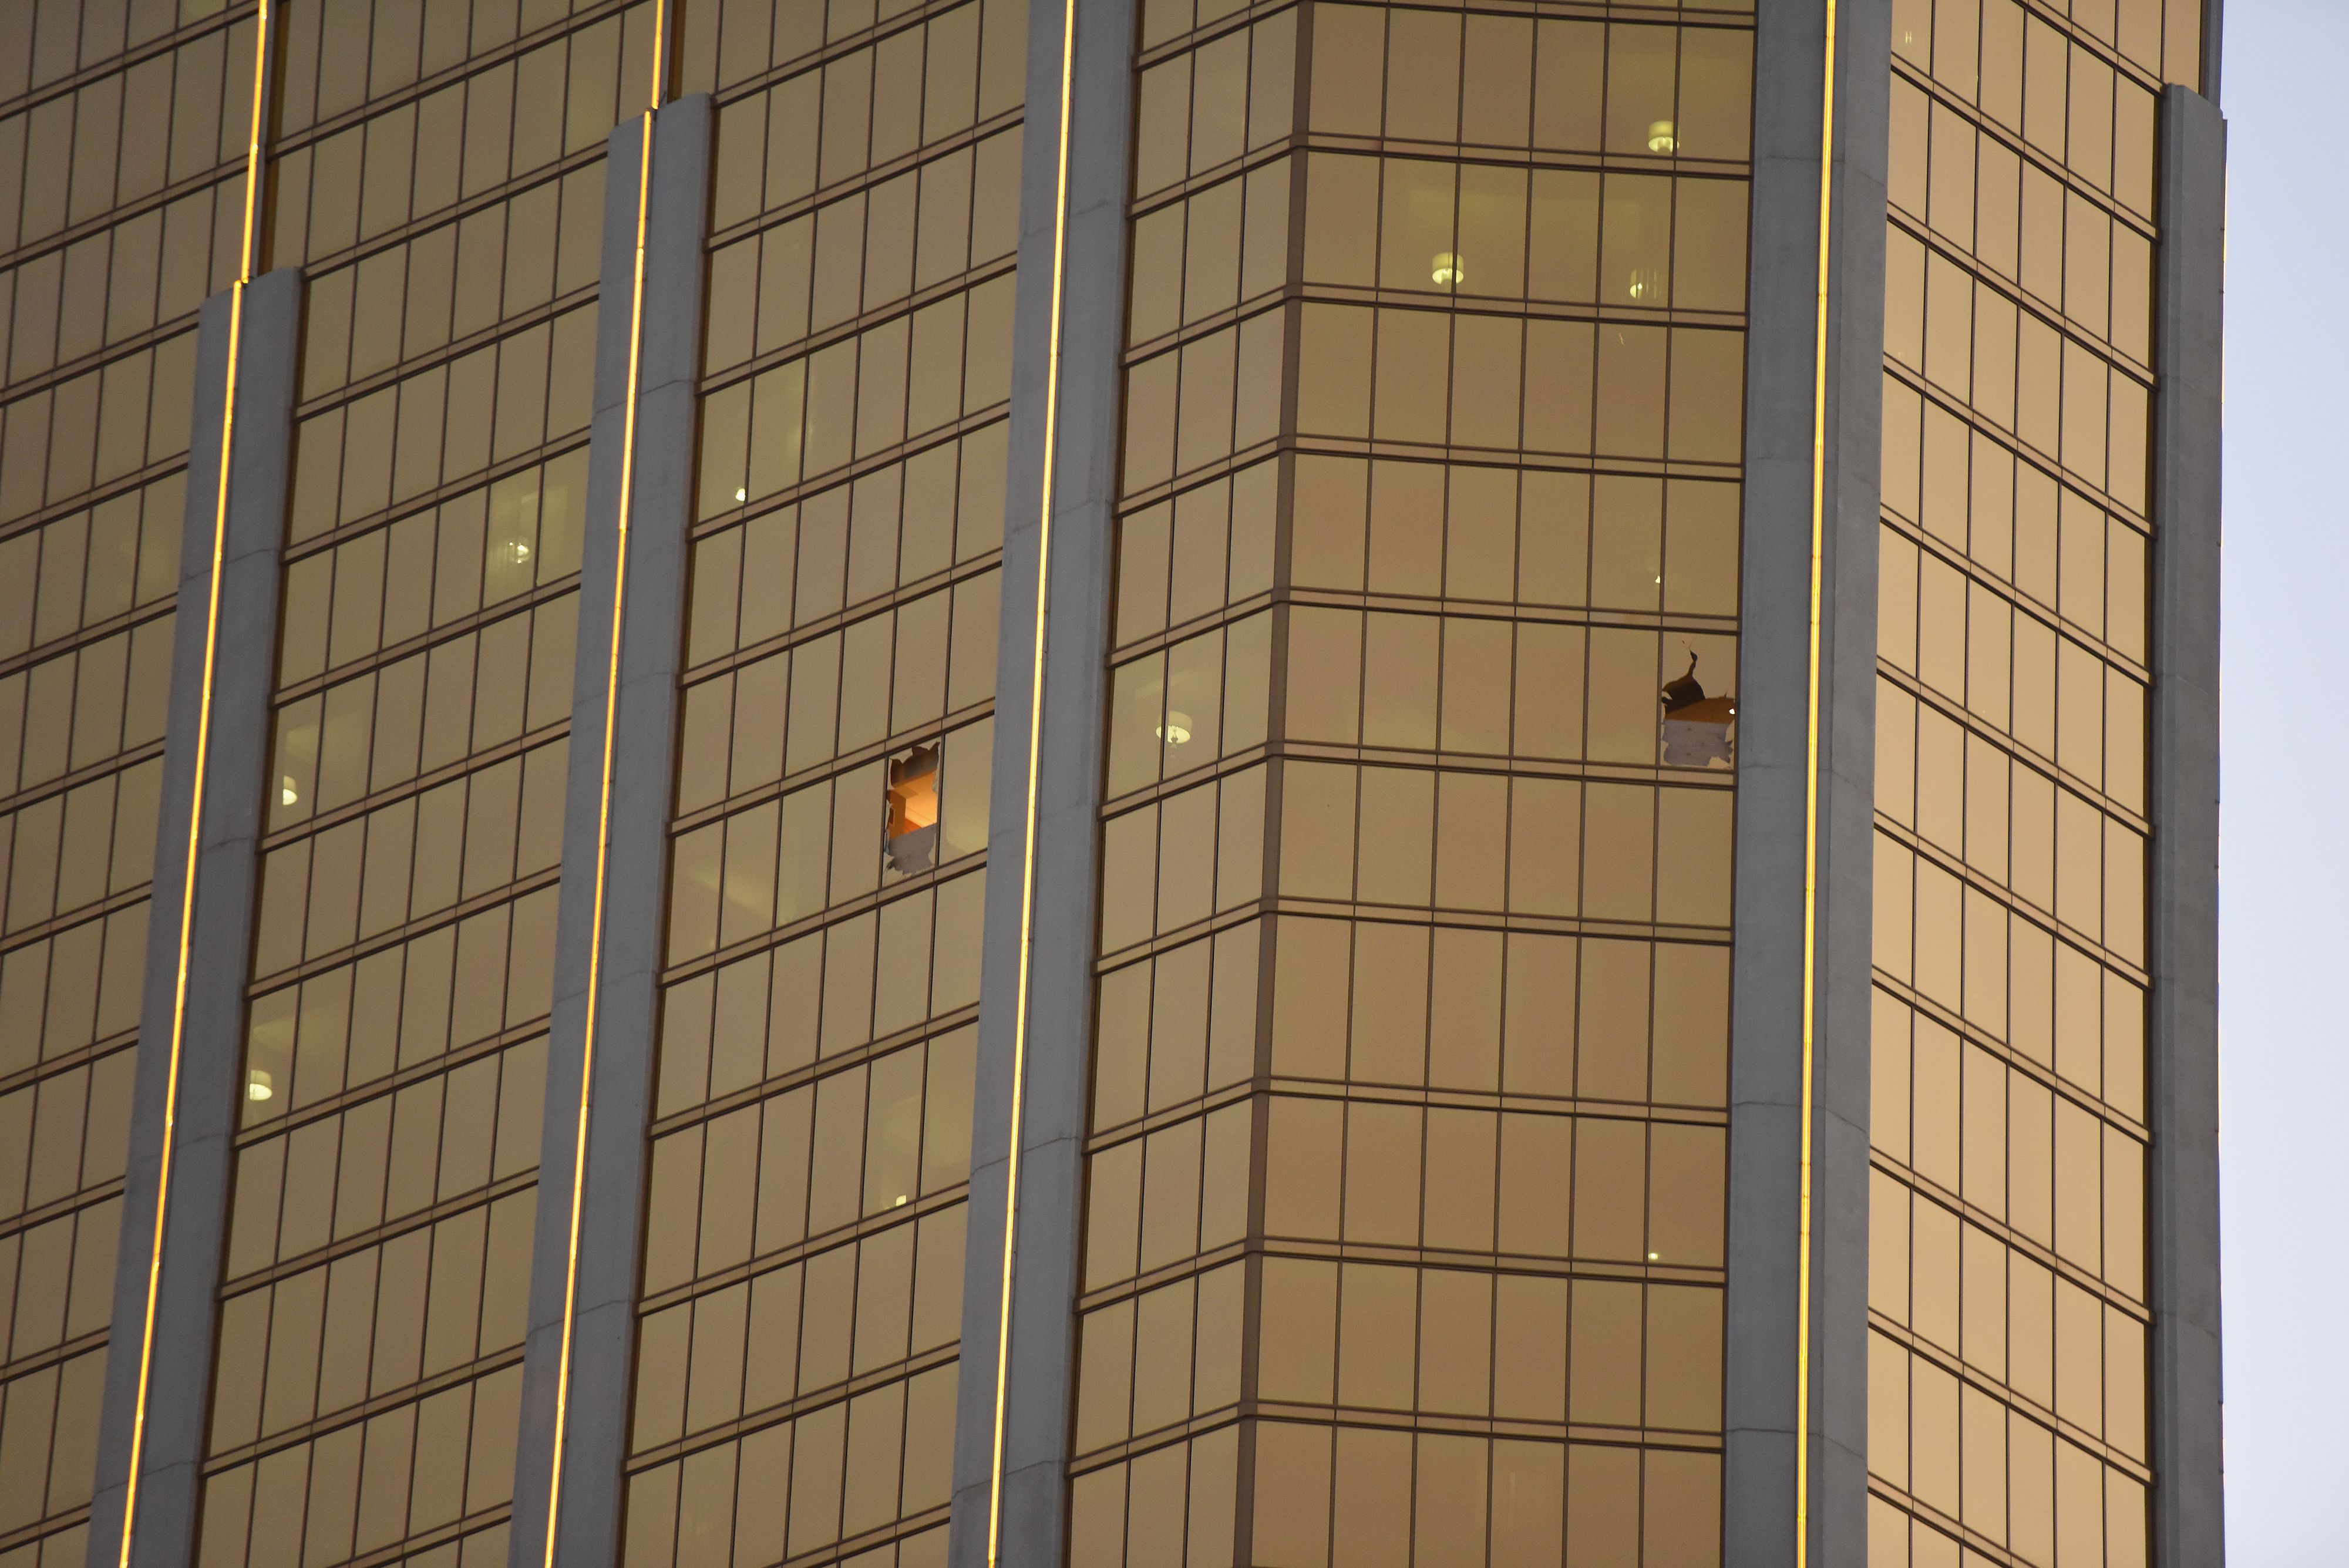 Broken windows that Stephen Paddock fired from in the The Mandalay Bay Hotel and Casino are seen in Las Vegas, Nevada, is seen October 4, 2017. (ROBYN BECK/AFP via Getty Images)